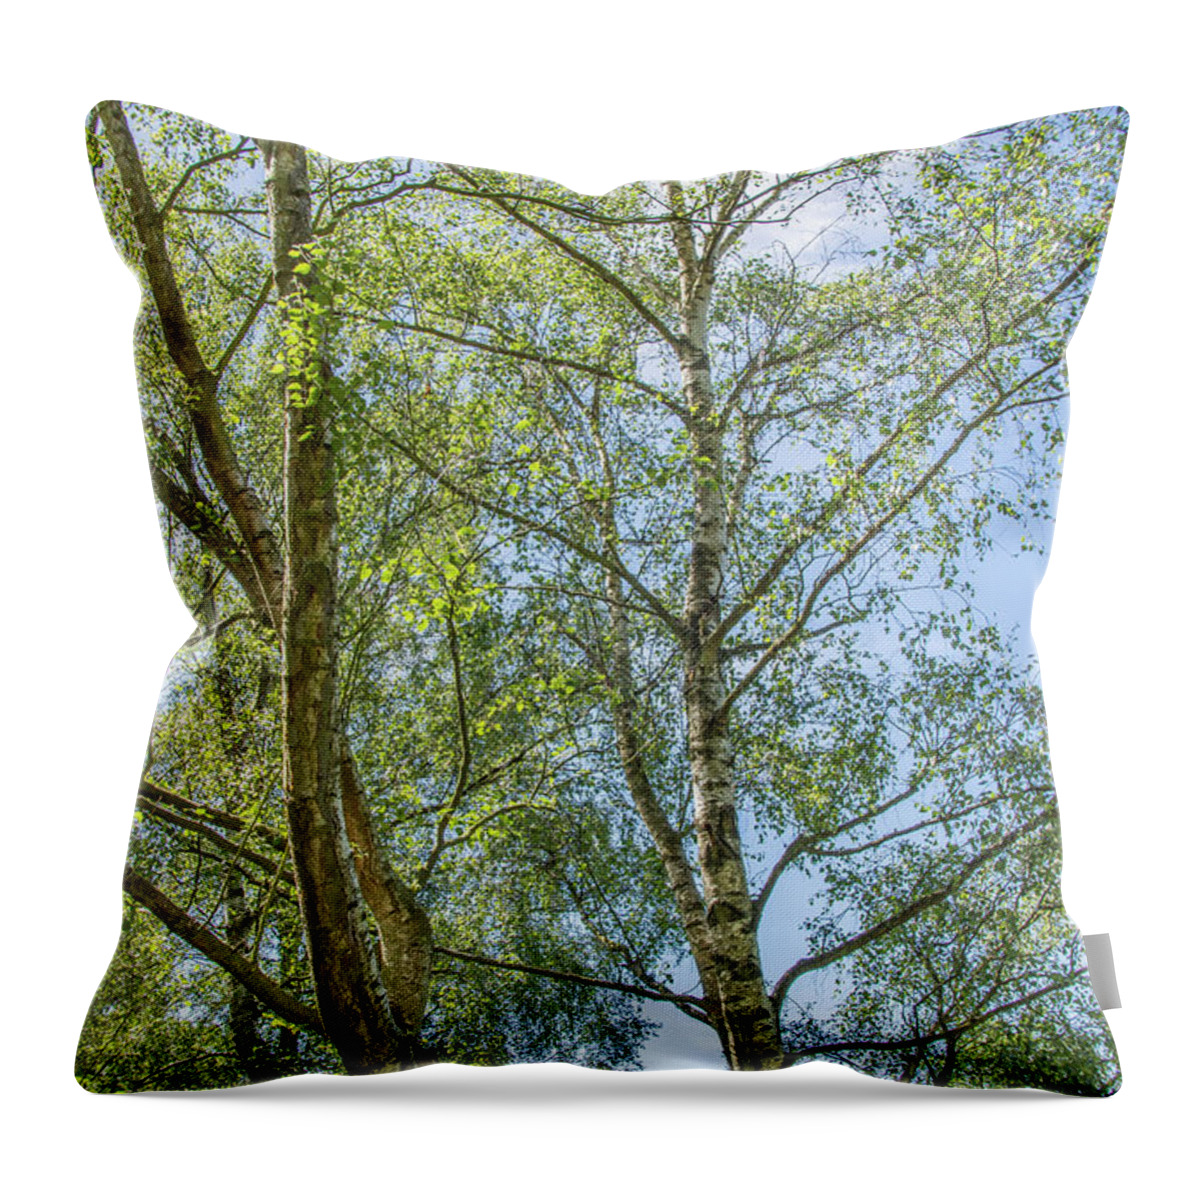 Trent Park Throw Pillow featuring the photograph Trent Park Trees Summer 3 by Edmund Peston